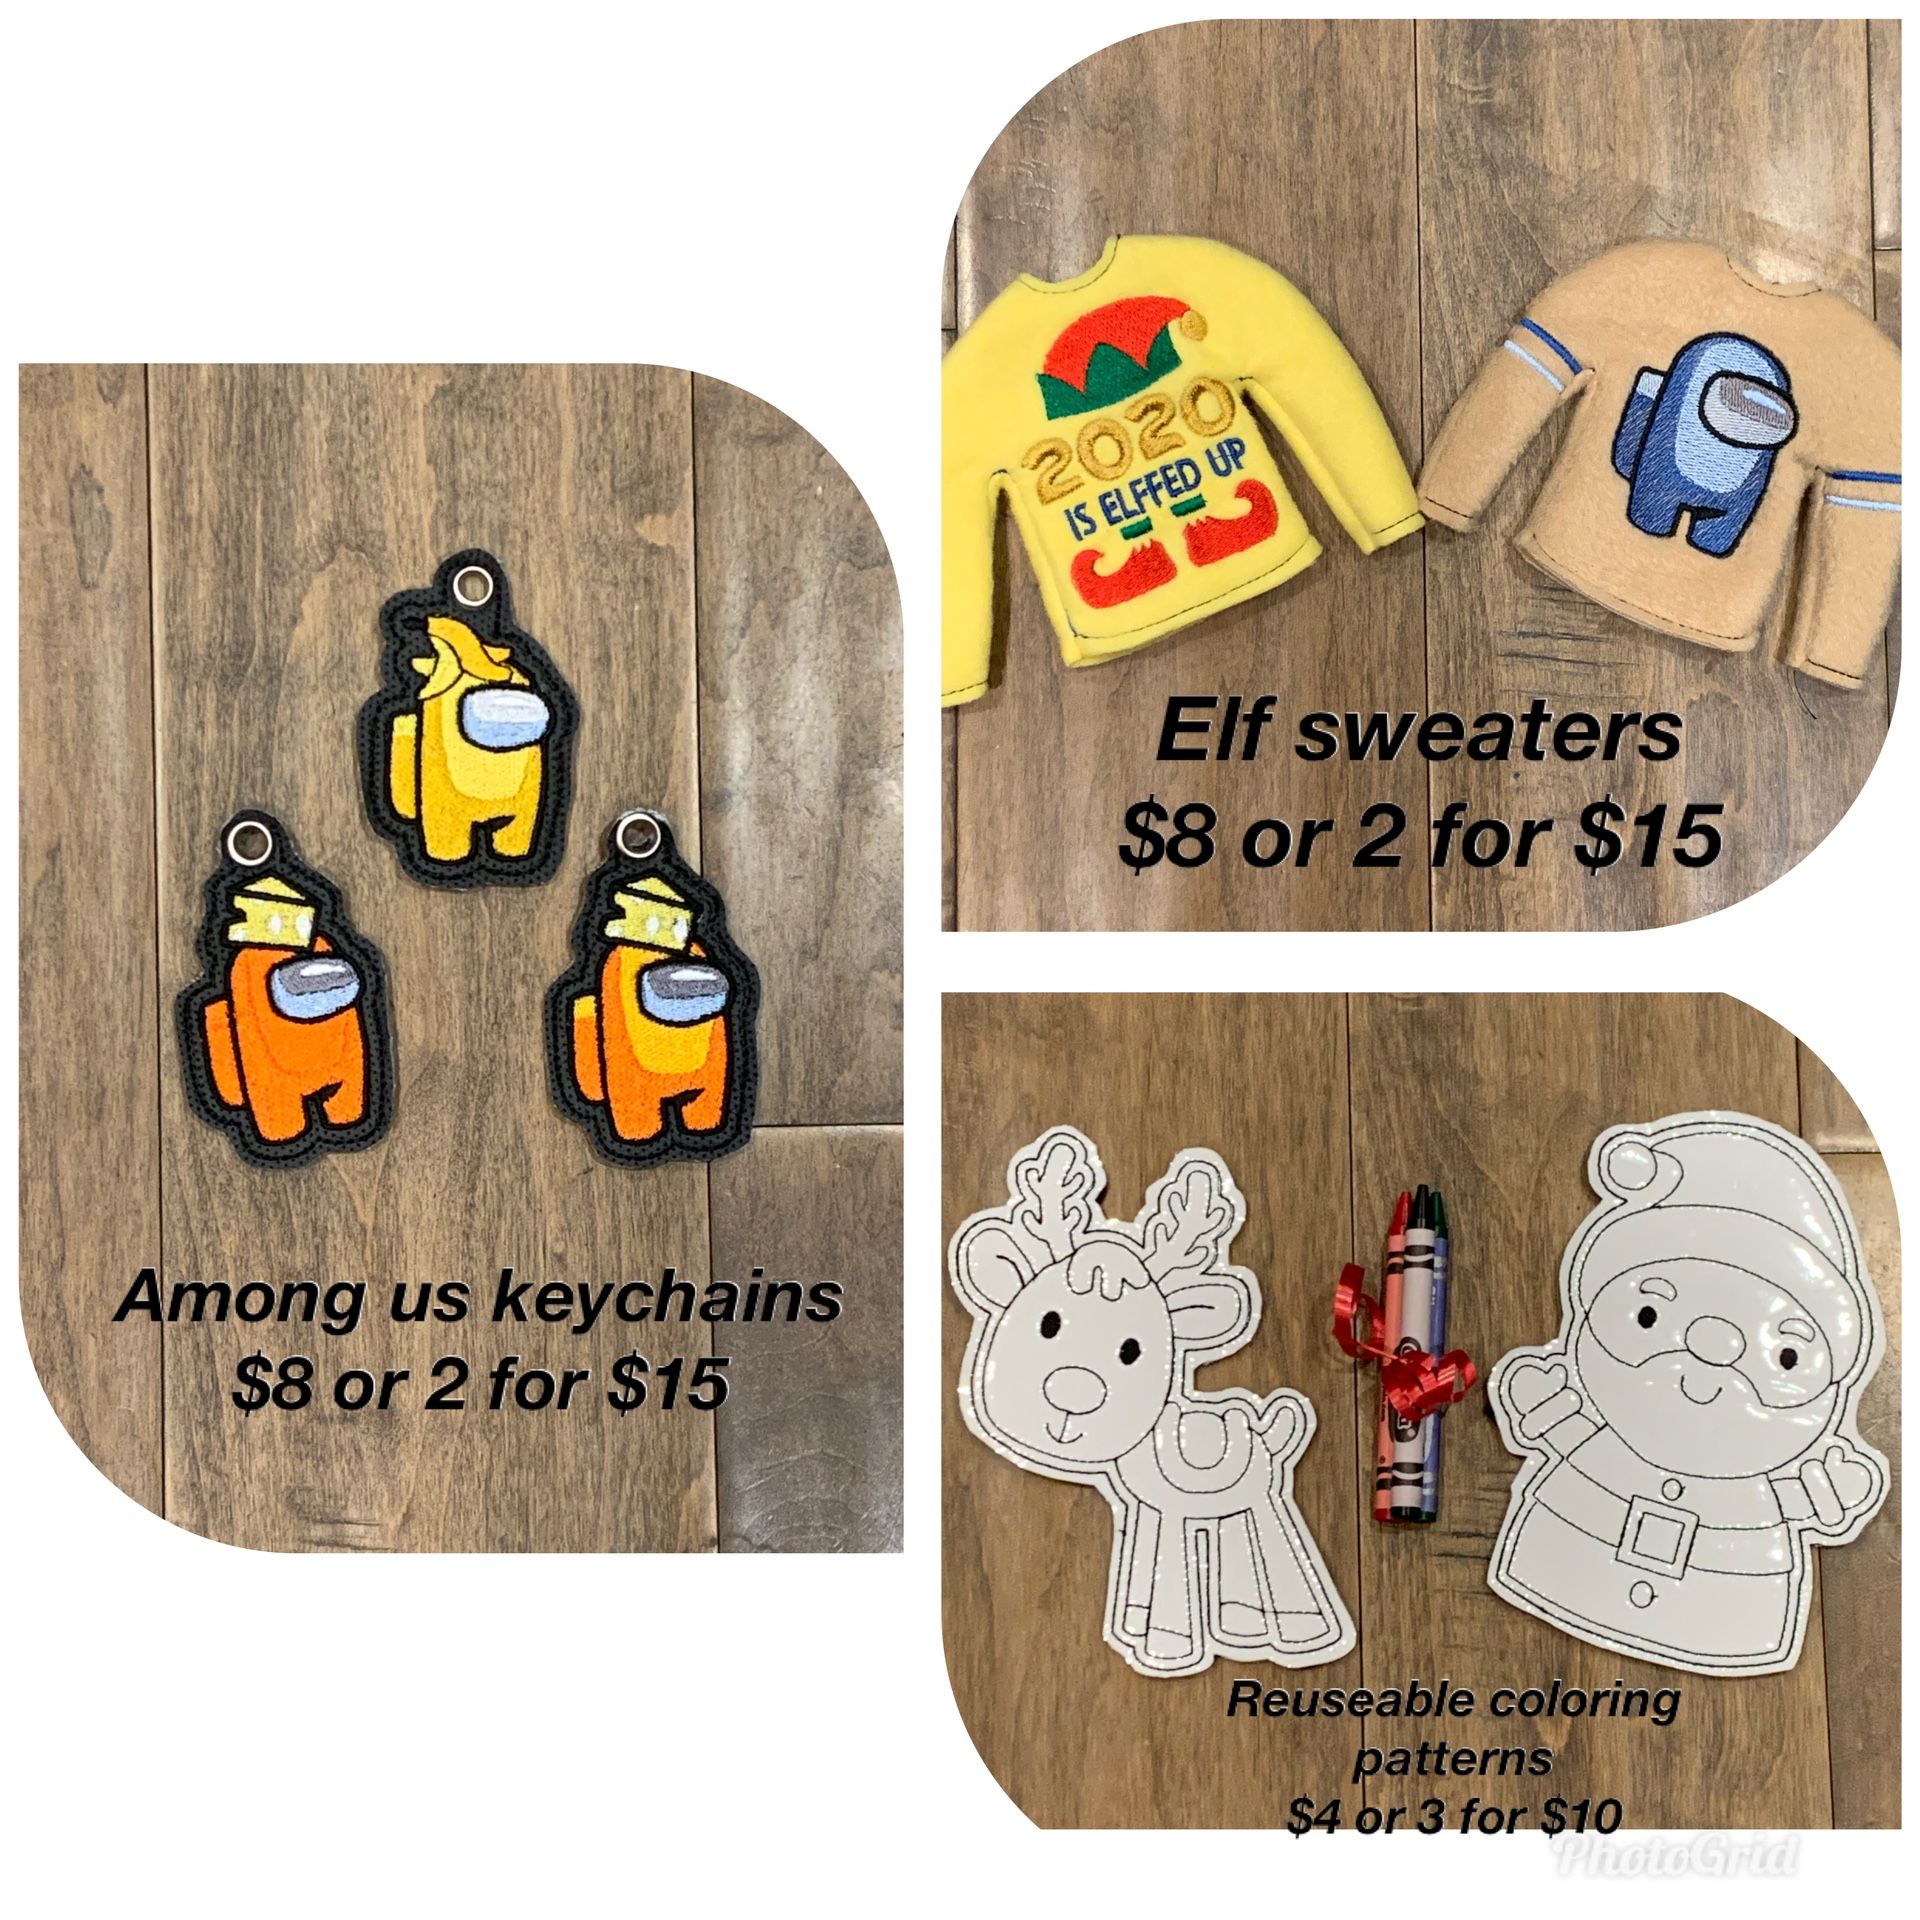 Among Us Keychains, Elf Sweaters And Reusable Coloring Patterns